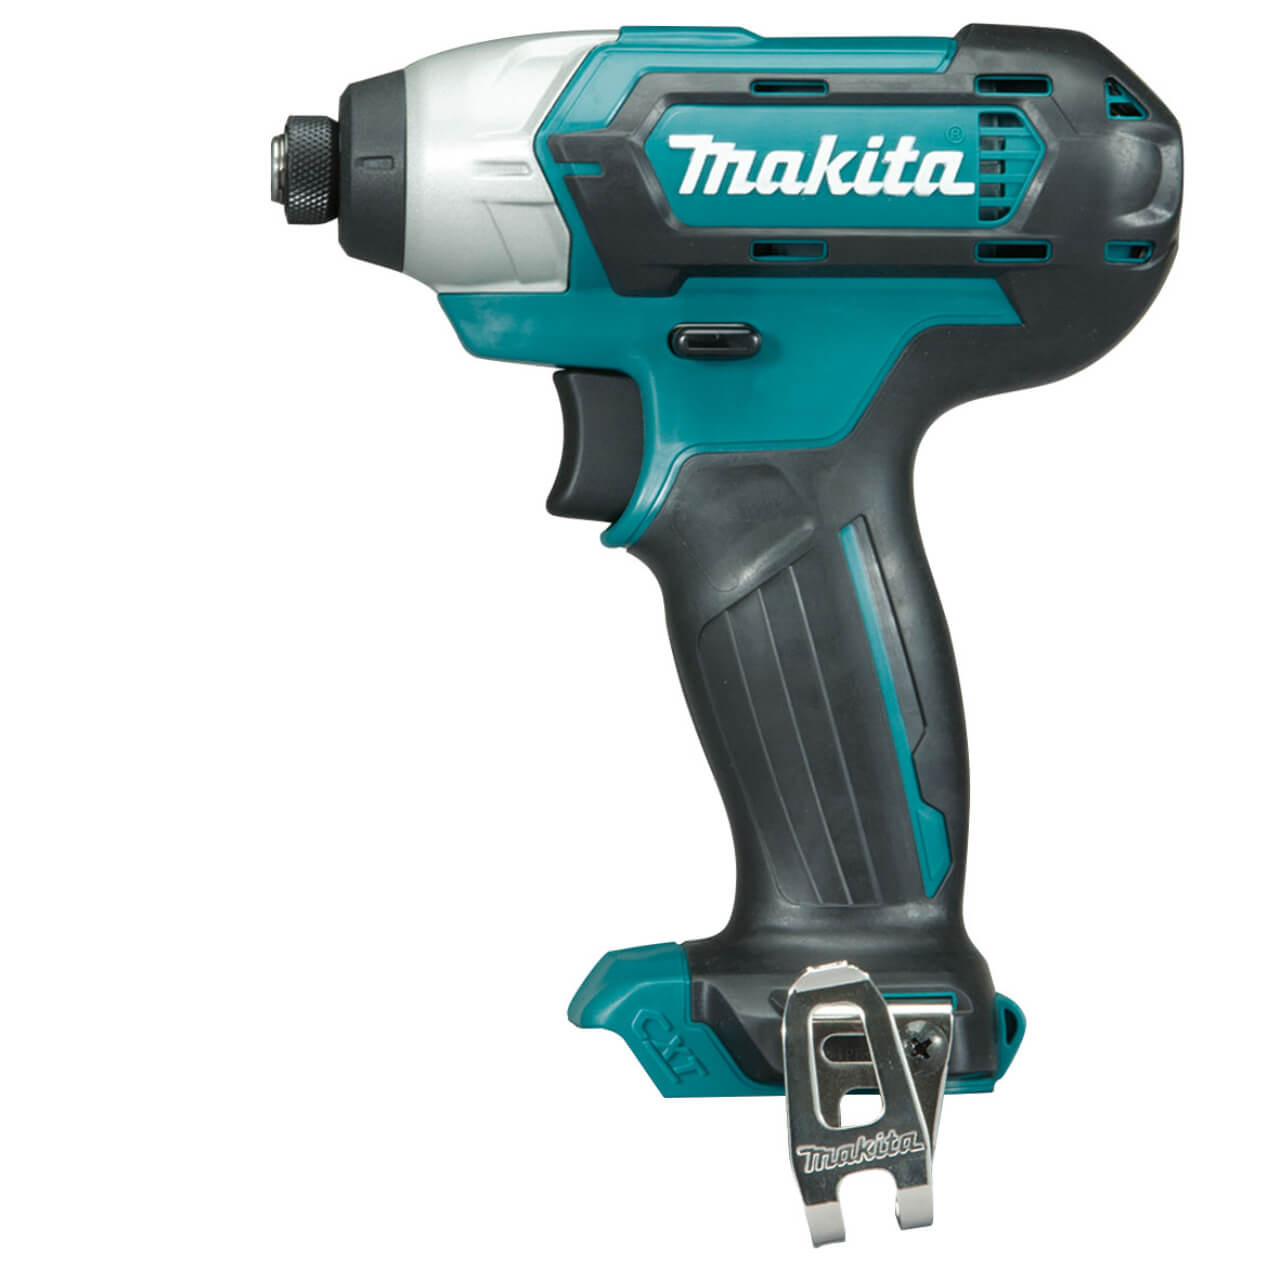 Makita 12V Max Impact Driver Kit - Includes 2 x 2.0Ah Batteries. Rapid Charger & Case